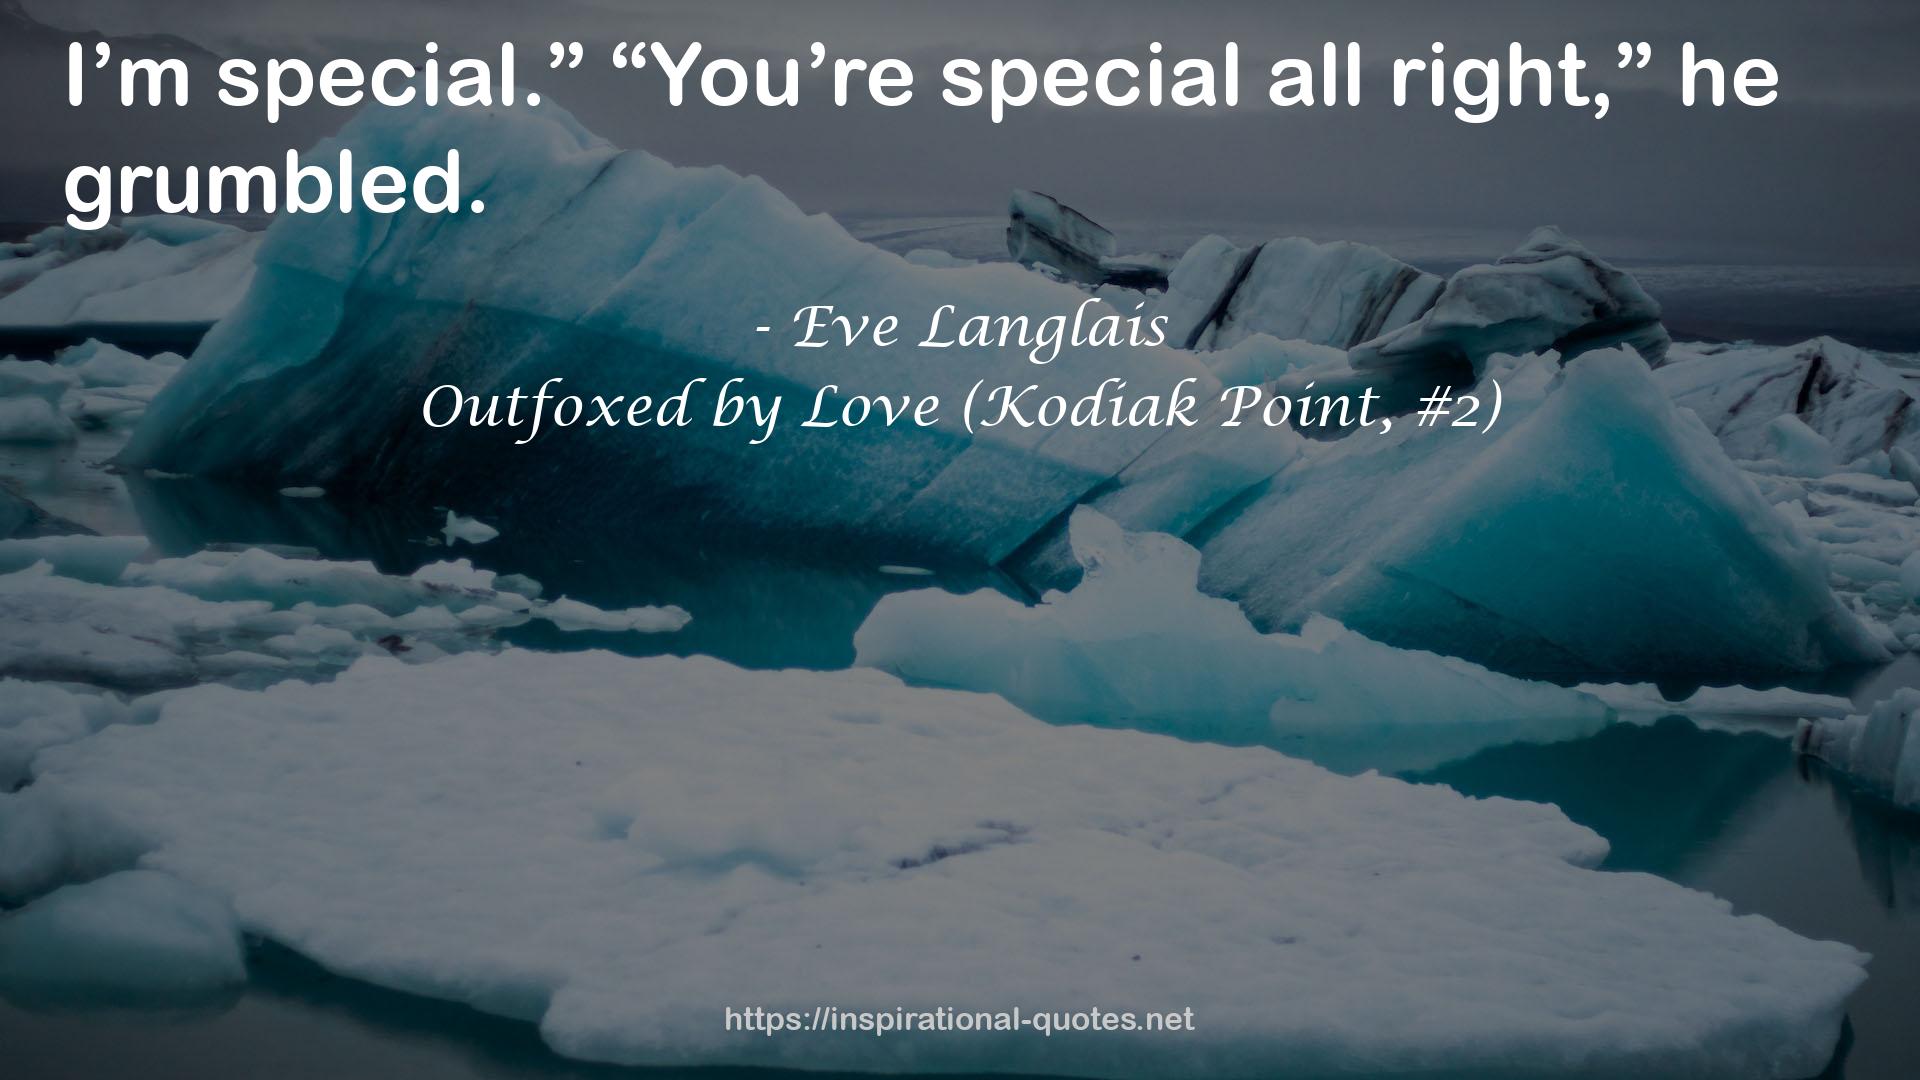 Outfoxed by Love (Kodiak Point, #2) QUOTES